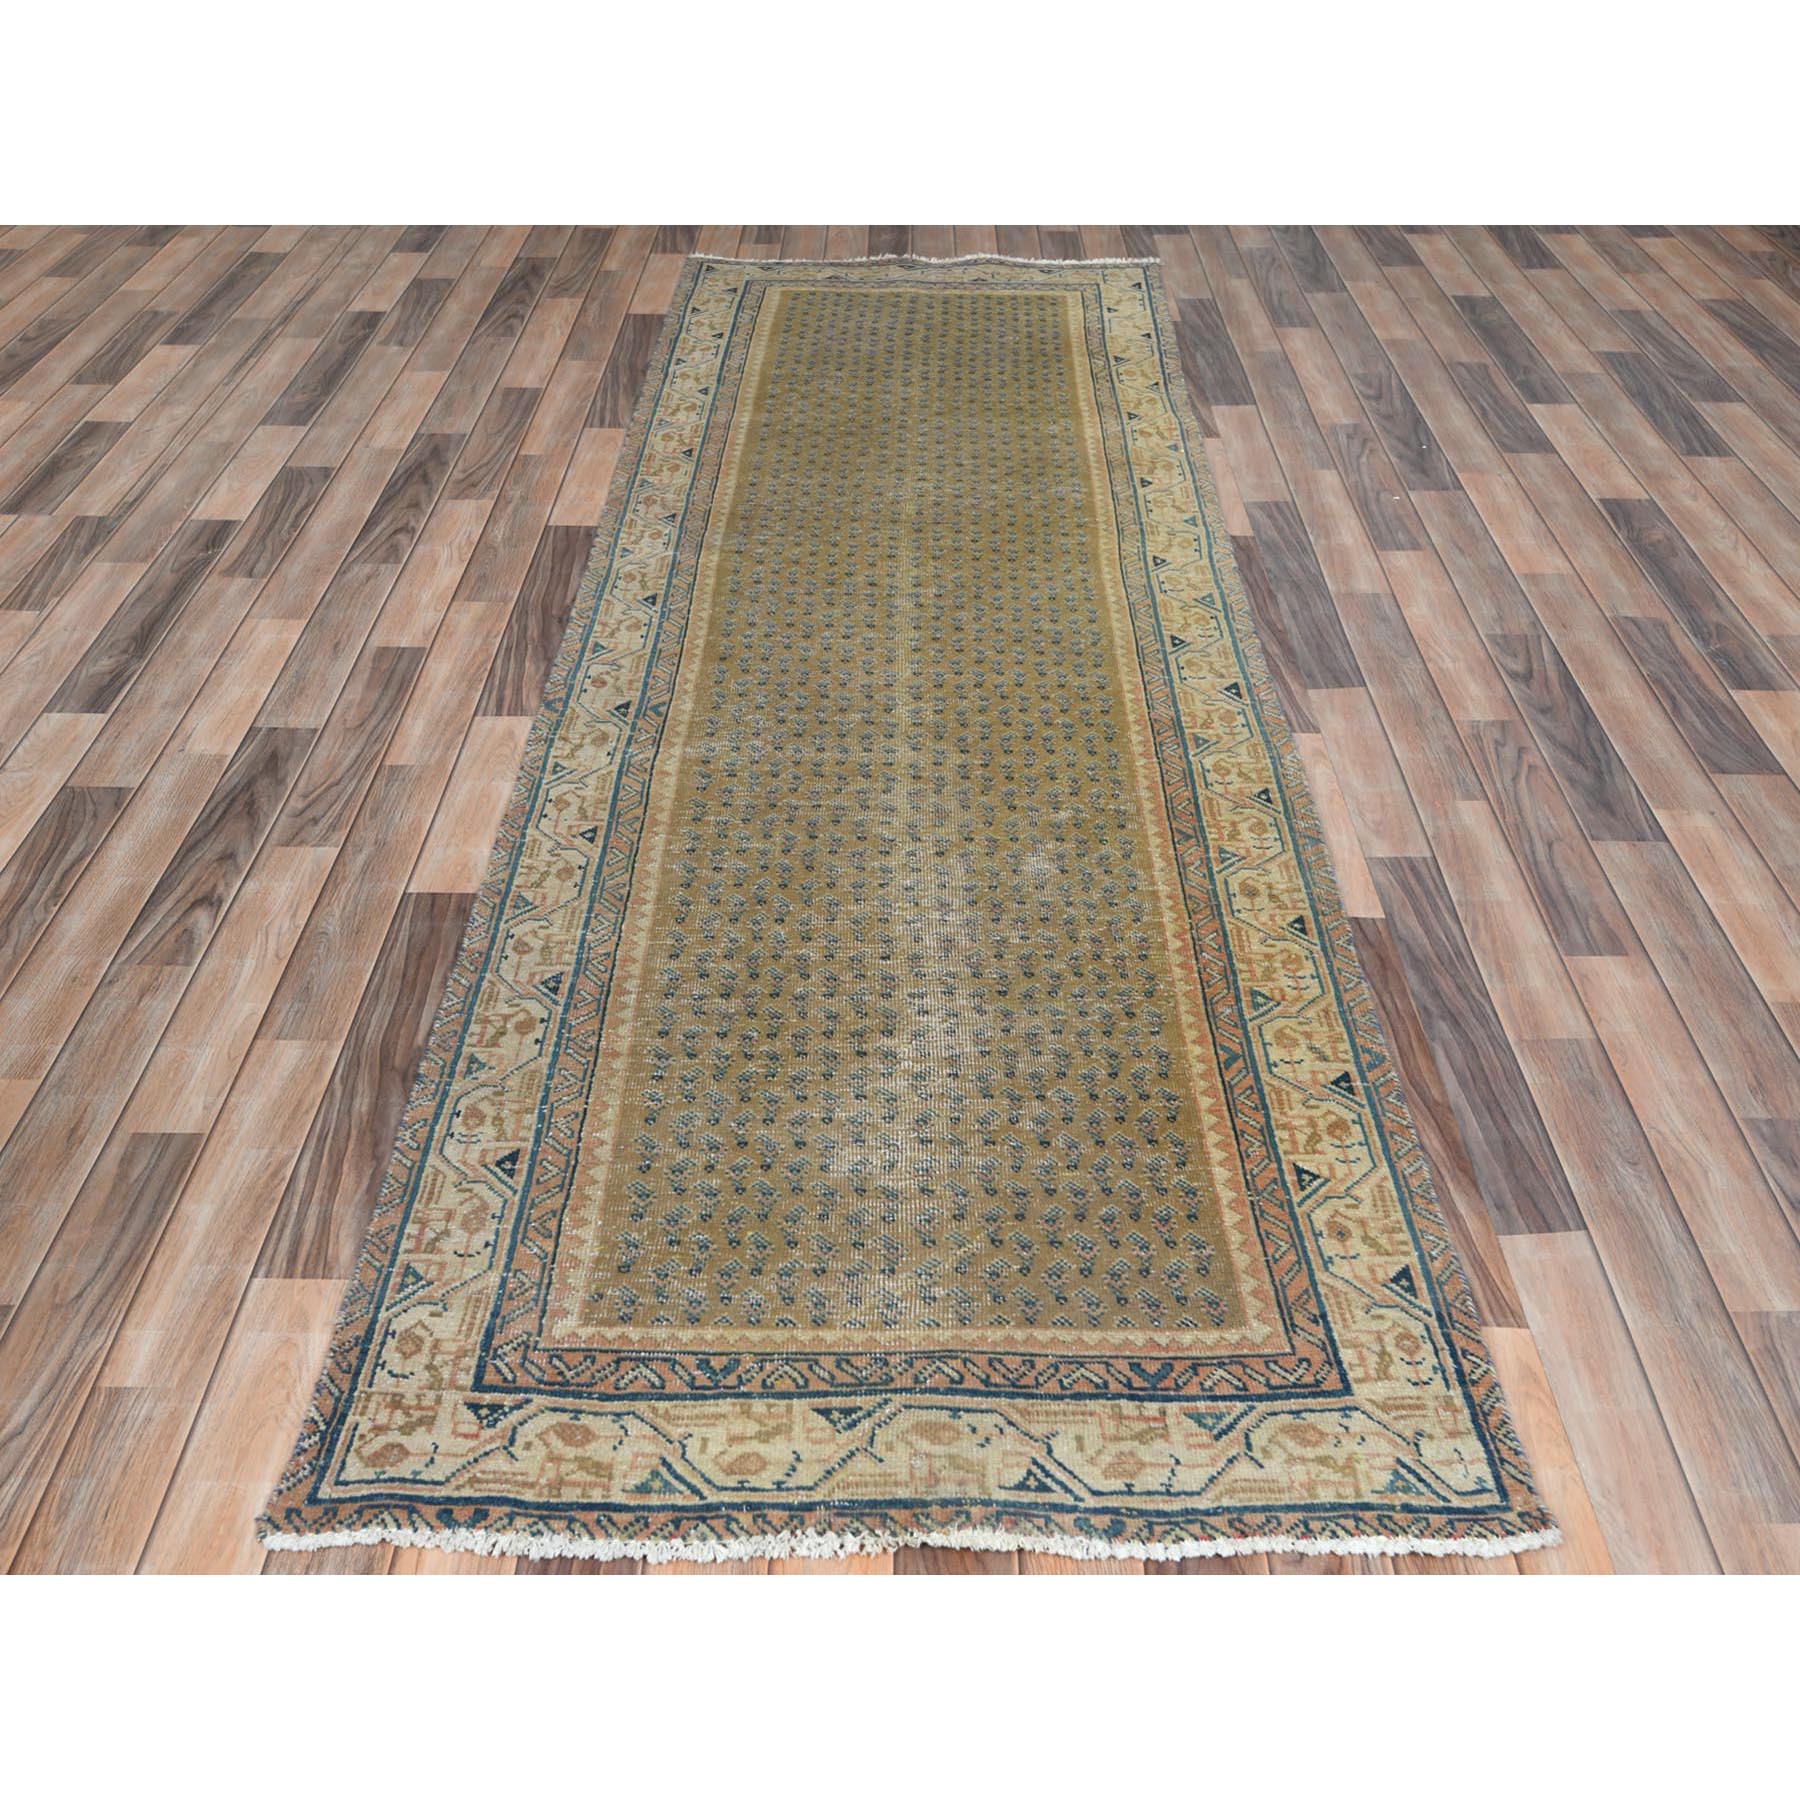 3'3"x10'2" Light Green, Pure Wool, Vintage Persian Serab with Small Repetitive Boteh Design, Hand Woven, Worn Down, Distressed Wide Runner Oriental Rug 